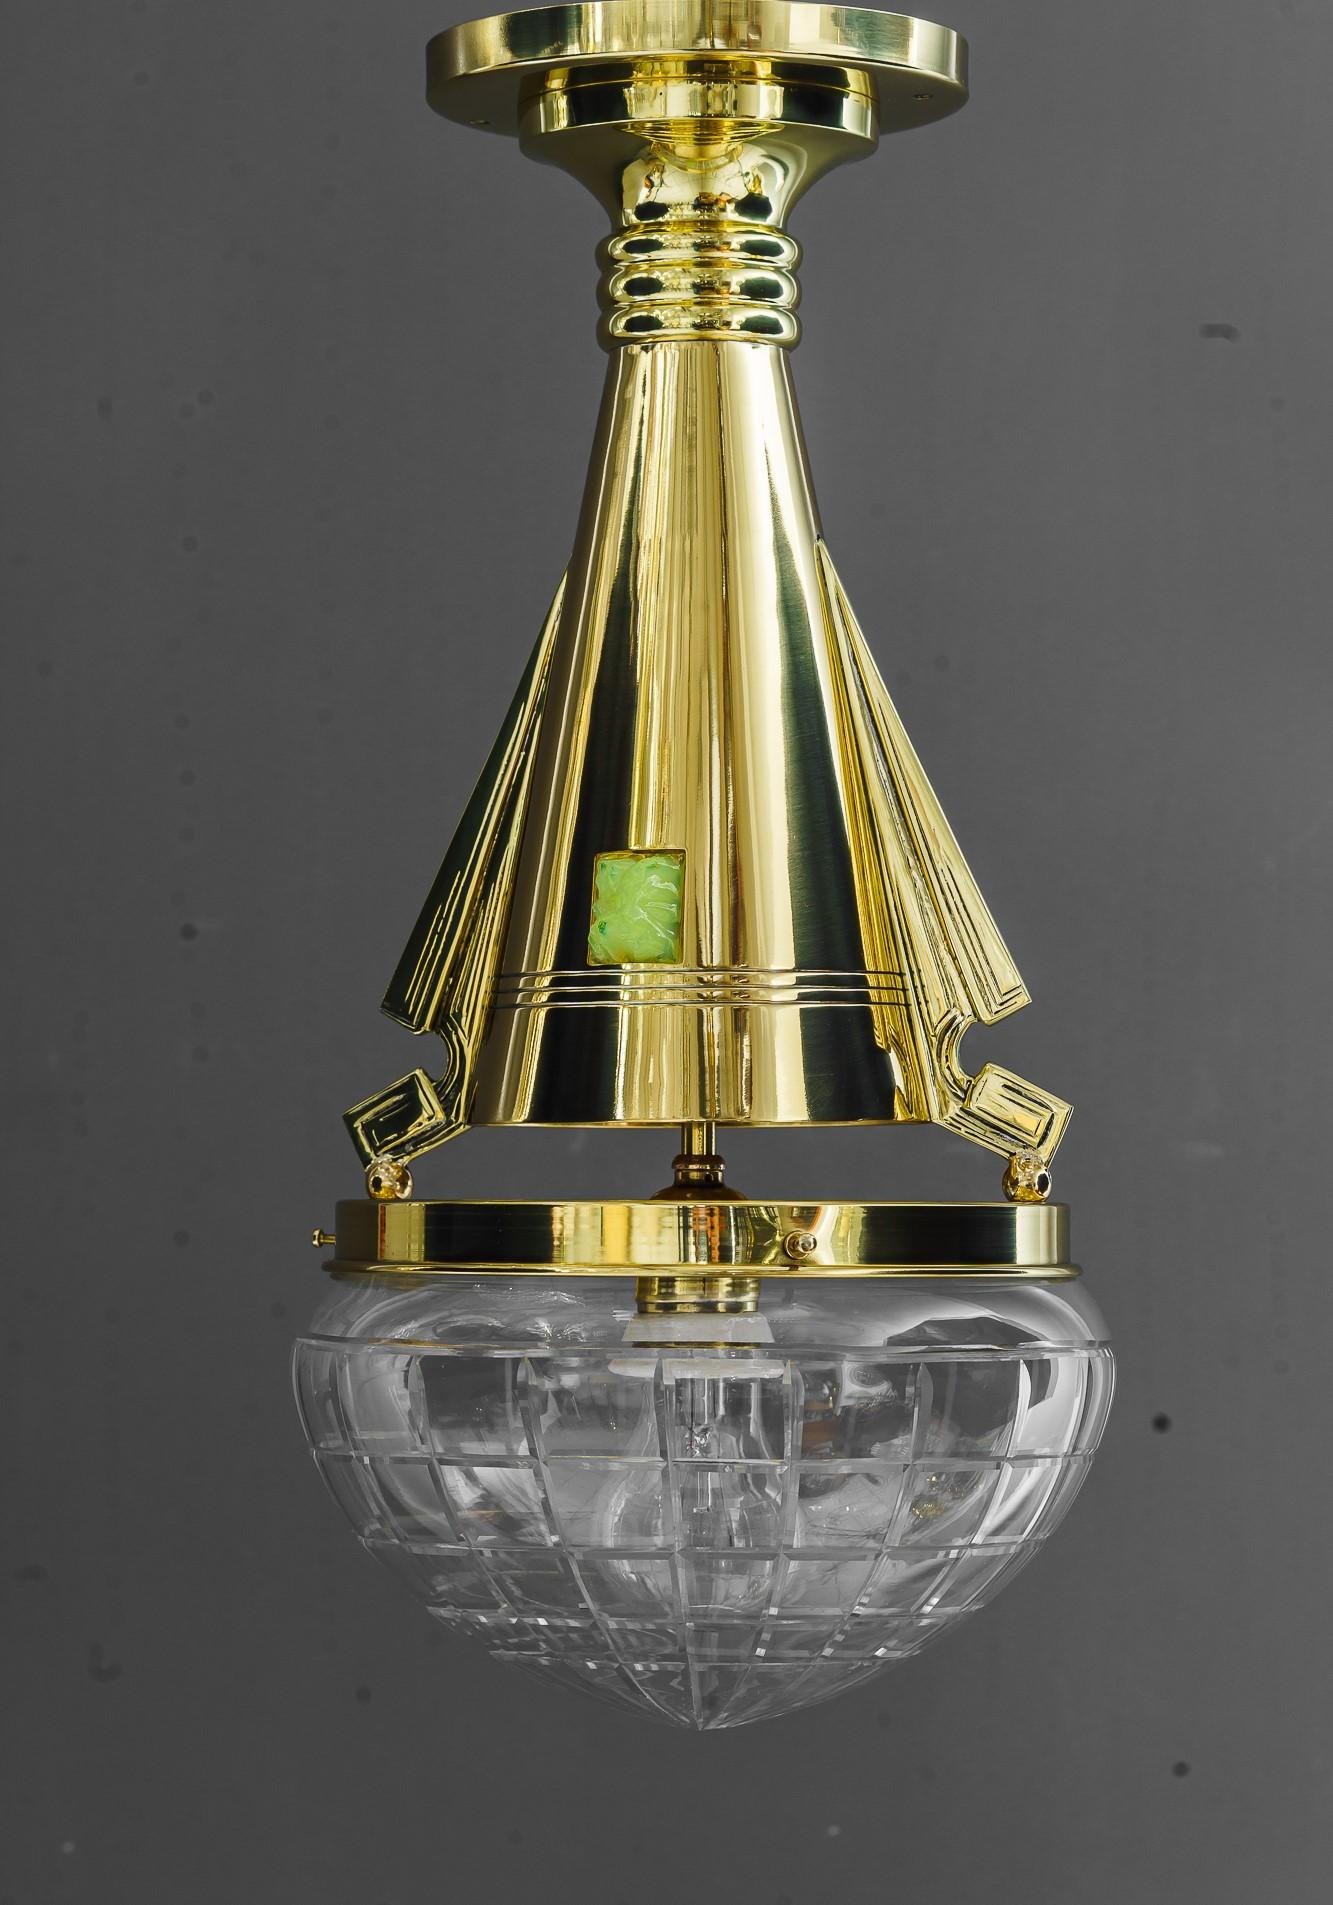 Art Deco ceiling lamp  with opaline and cut glass vienna around 1920s
Brass polished and stove enameled
Original cut glass shade
Original opaline glass stones